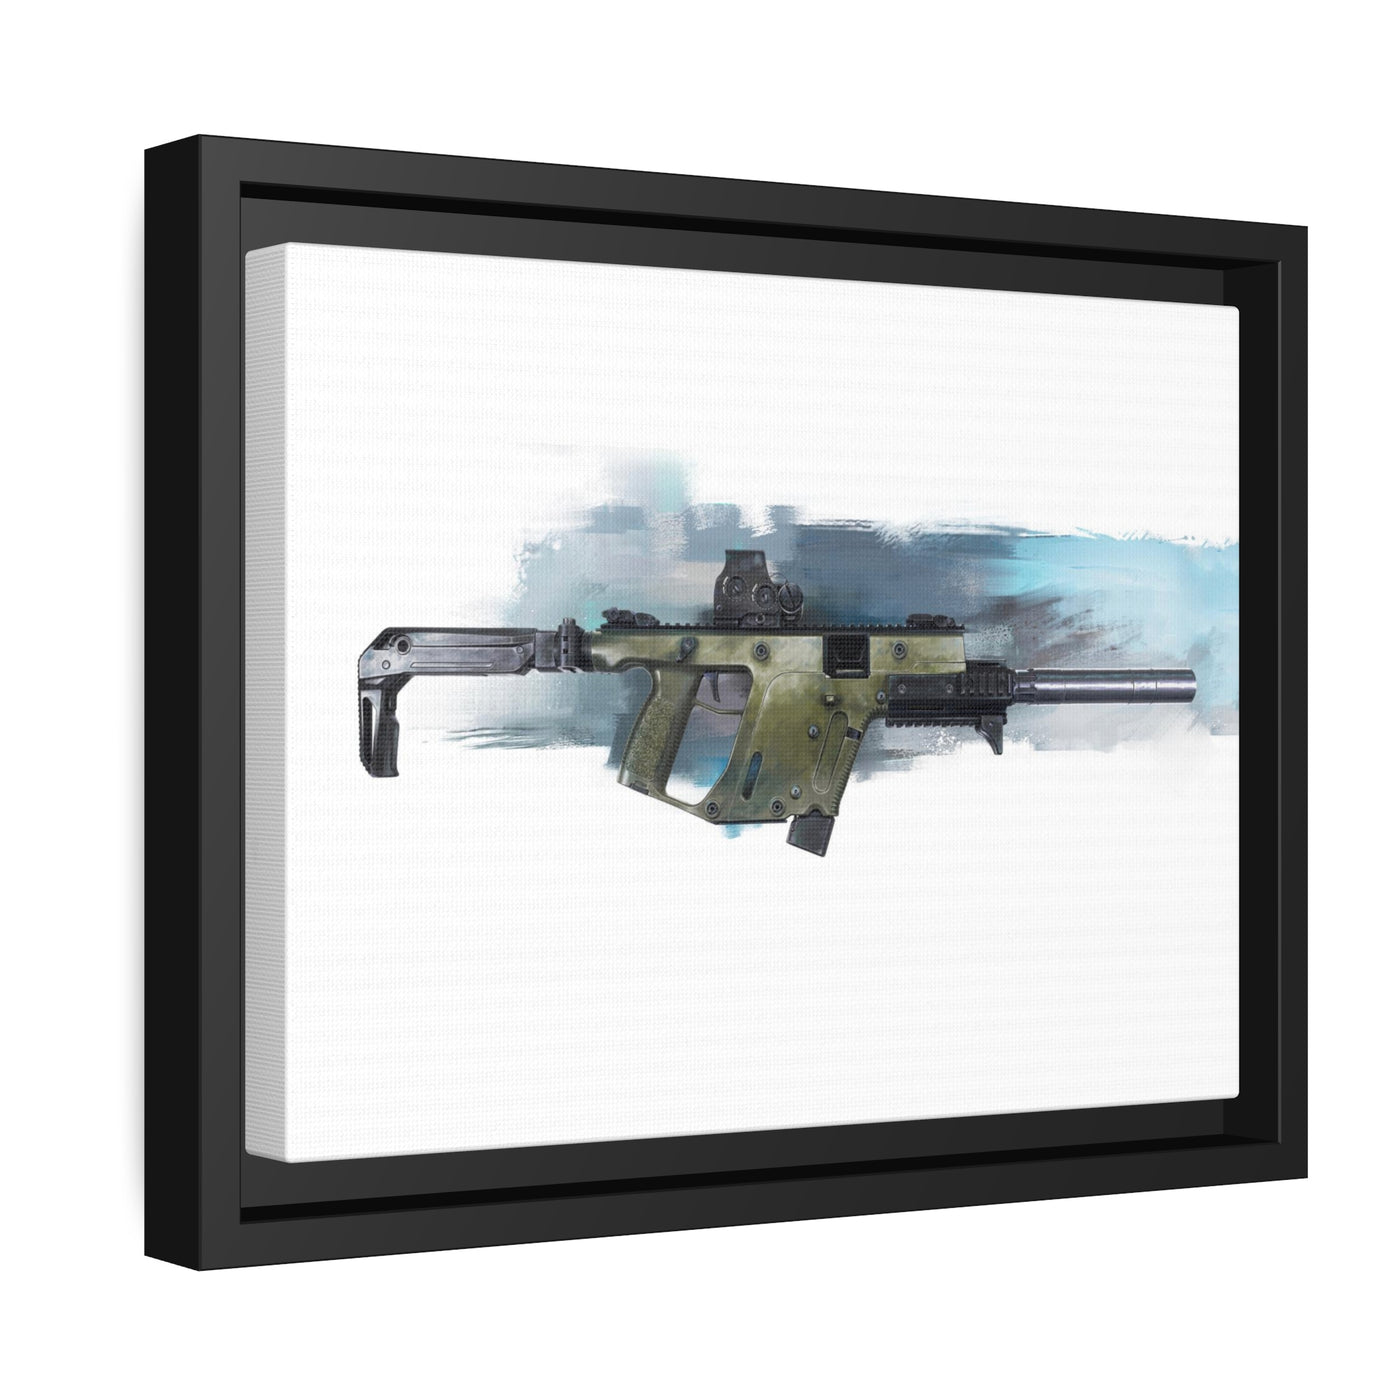 The Vindicator - Suppressed SMG Painting - Blue Background - Black Framed Wrapped Canvas - Value Collection